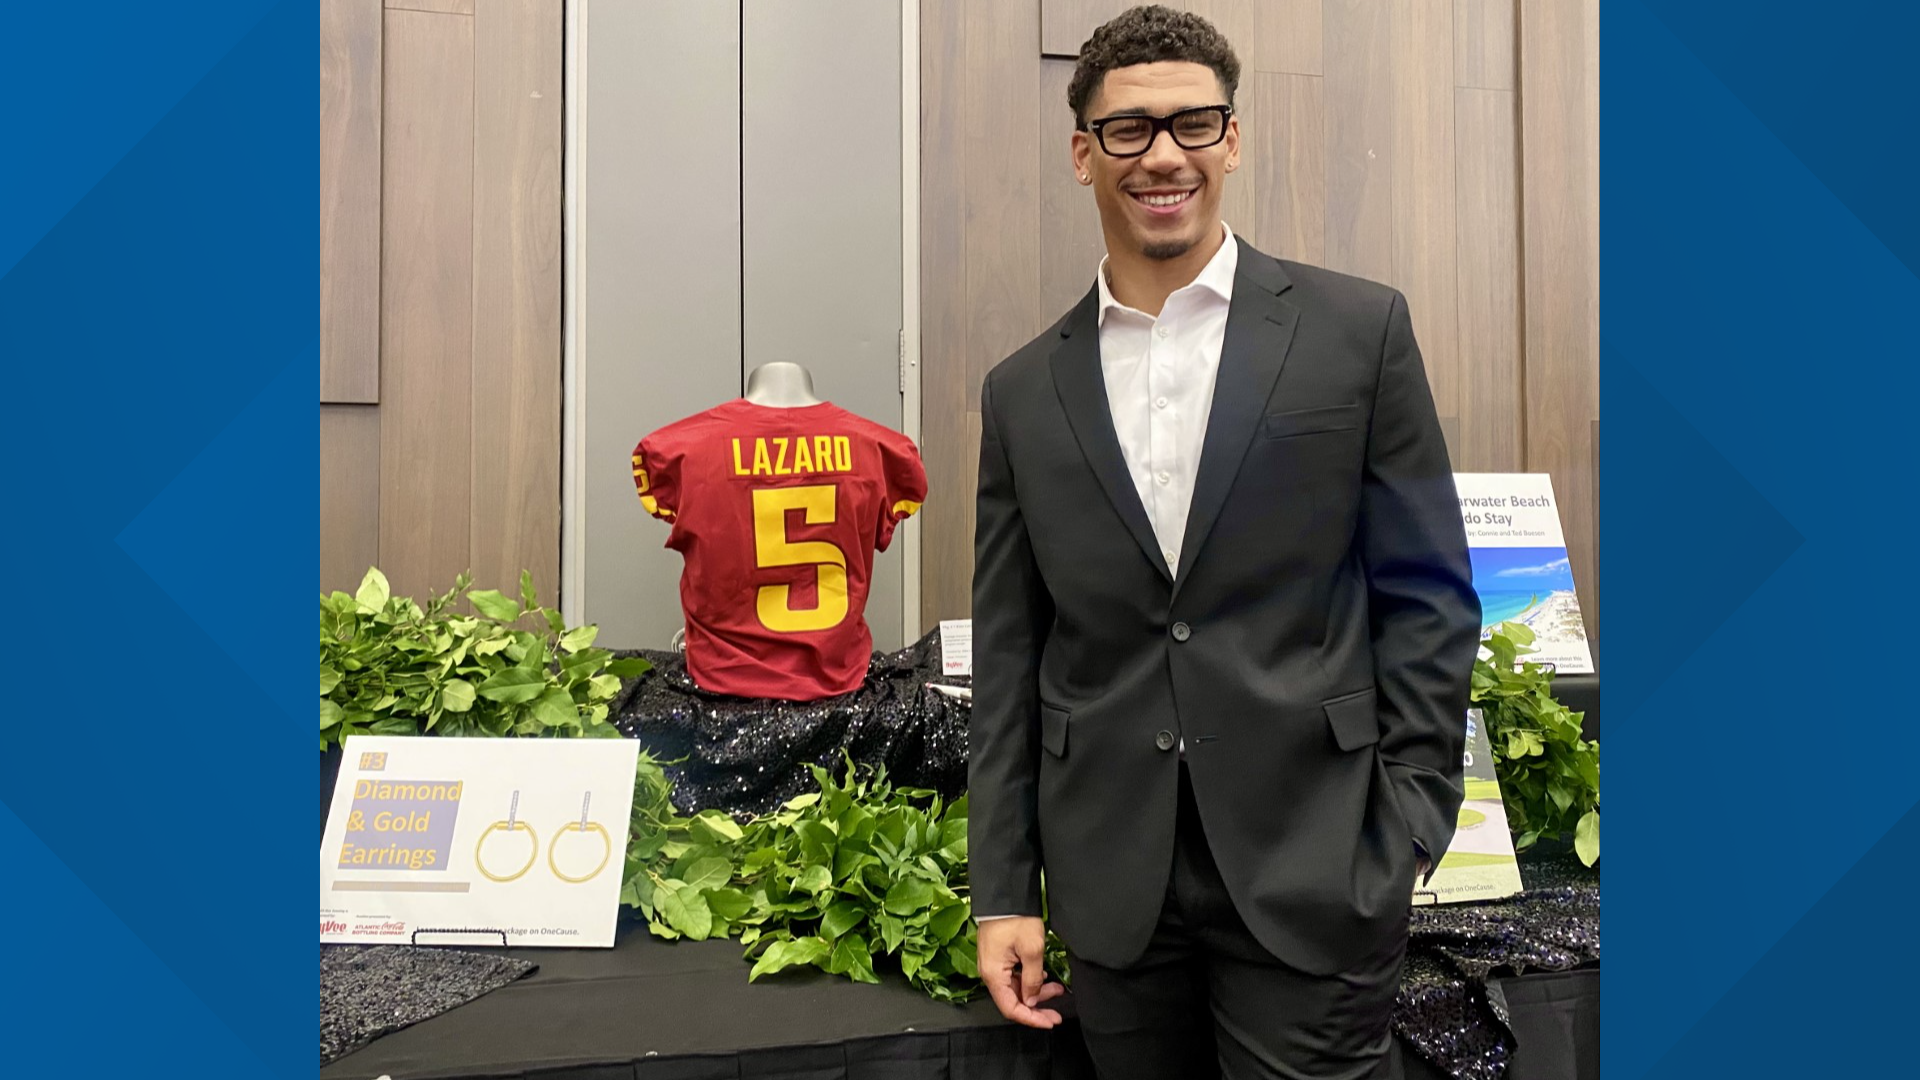 While most of the awards Allen Lazard has won in his career have been for his talent on the football field, on Friday, he was honored for his character.